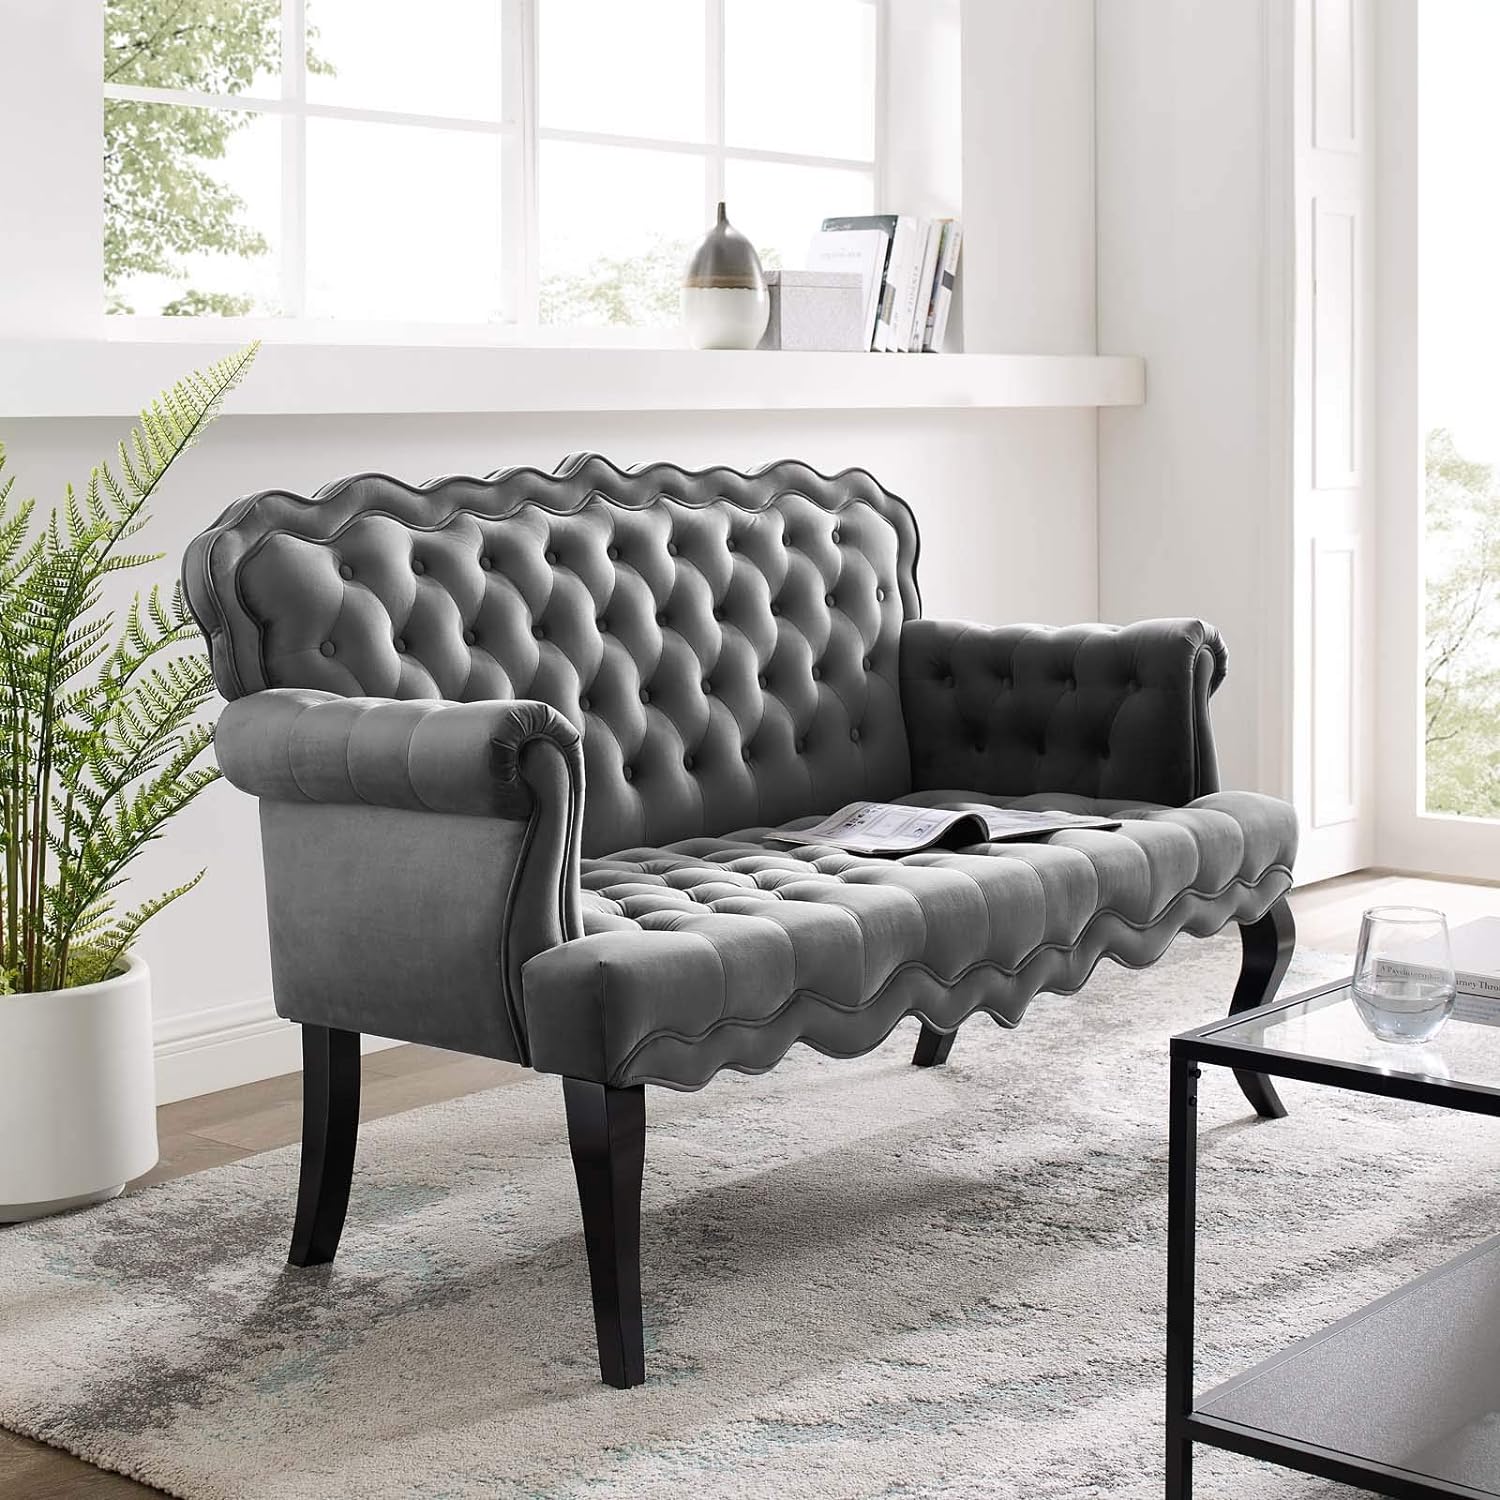 traditional gray chesterfield settee